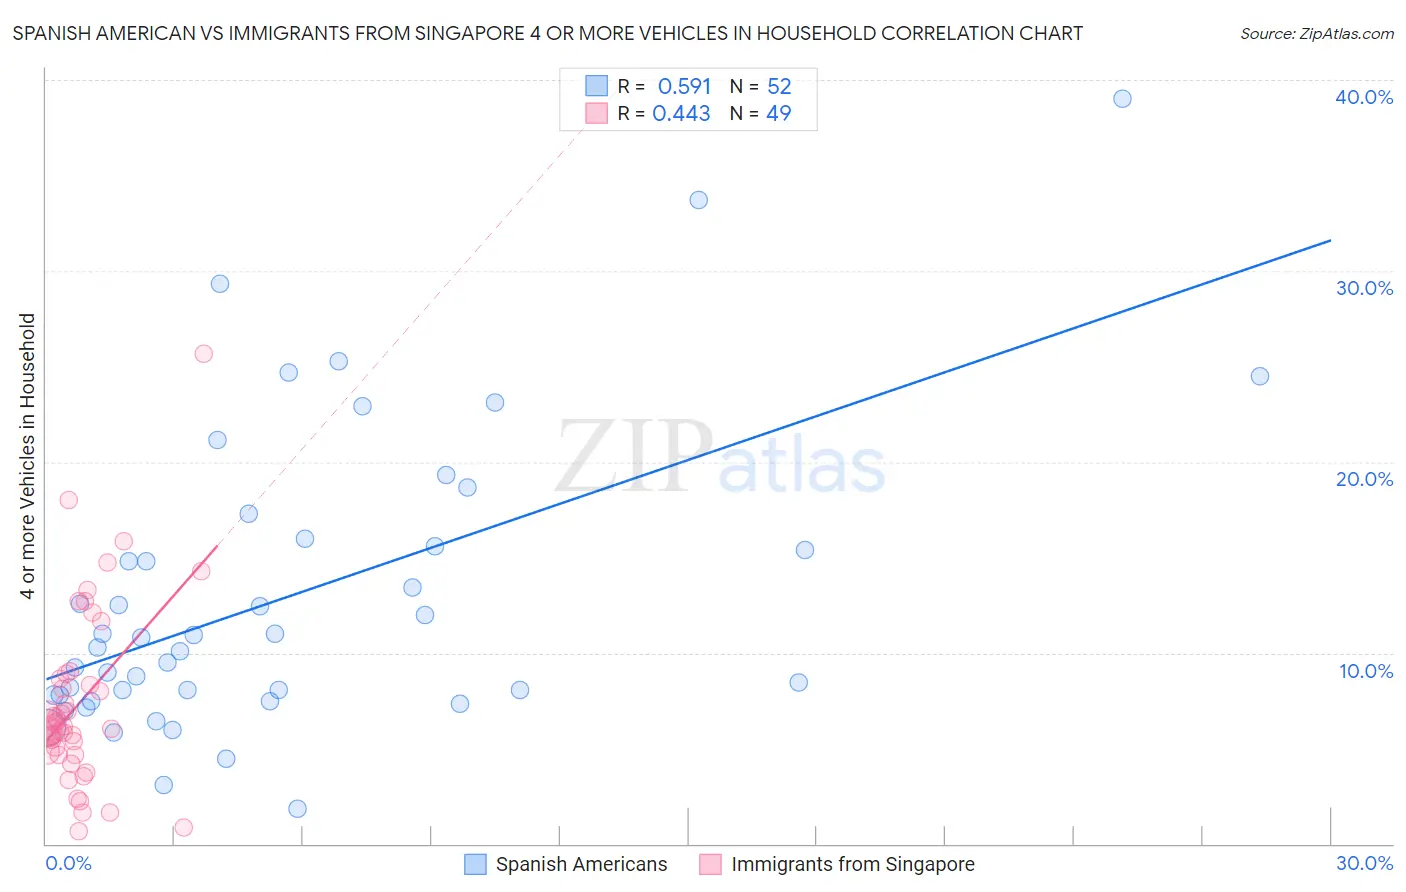 Spanish American vs Immigrants from Singapore 4 or more Vehicles in Household